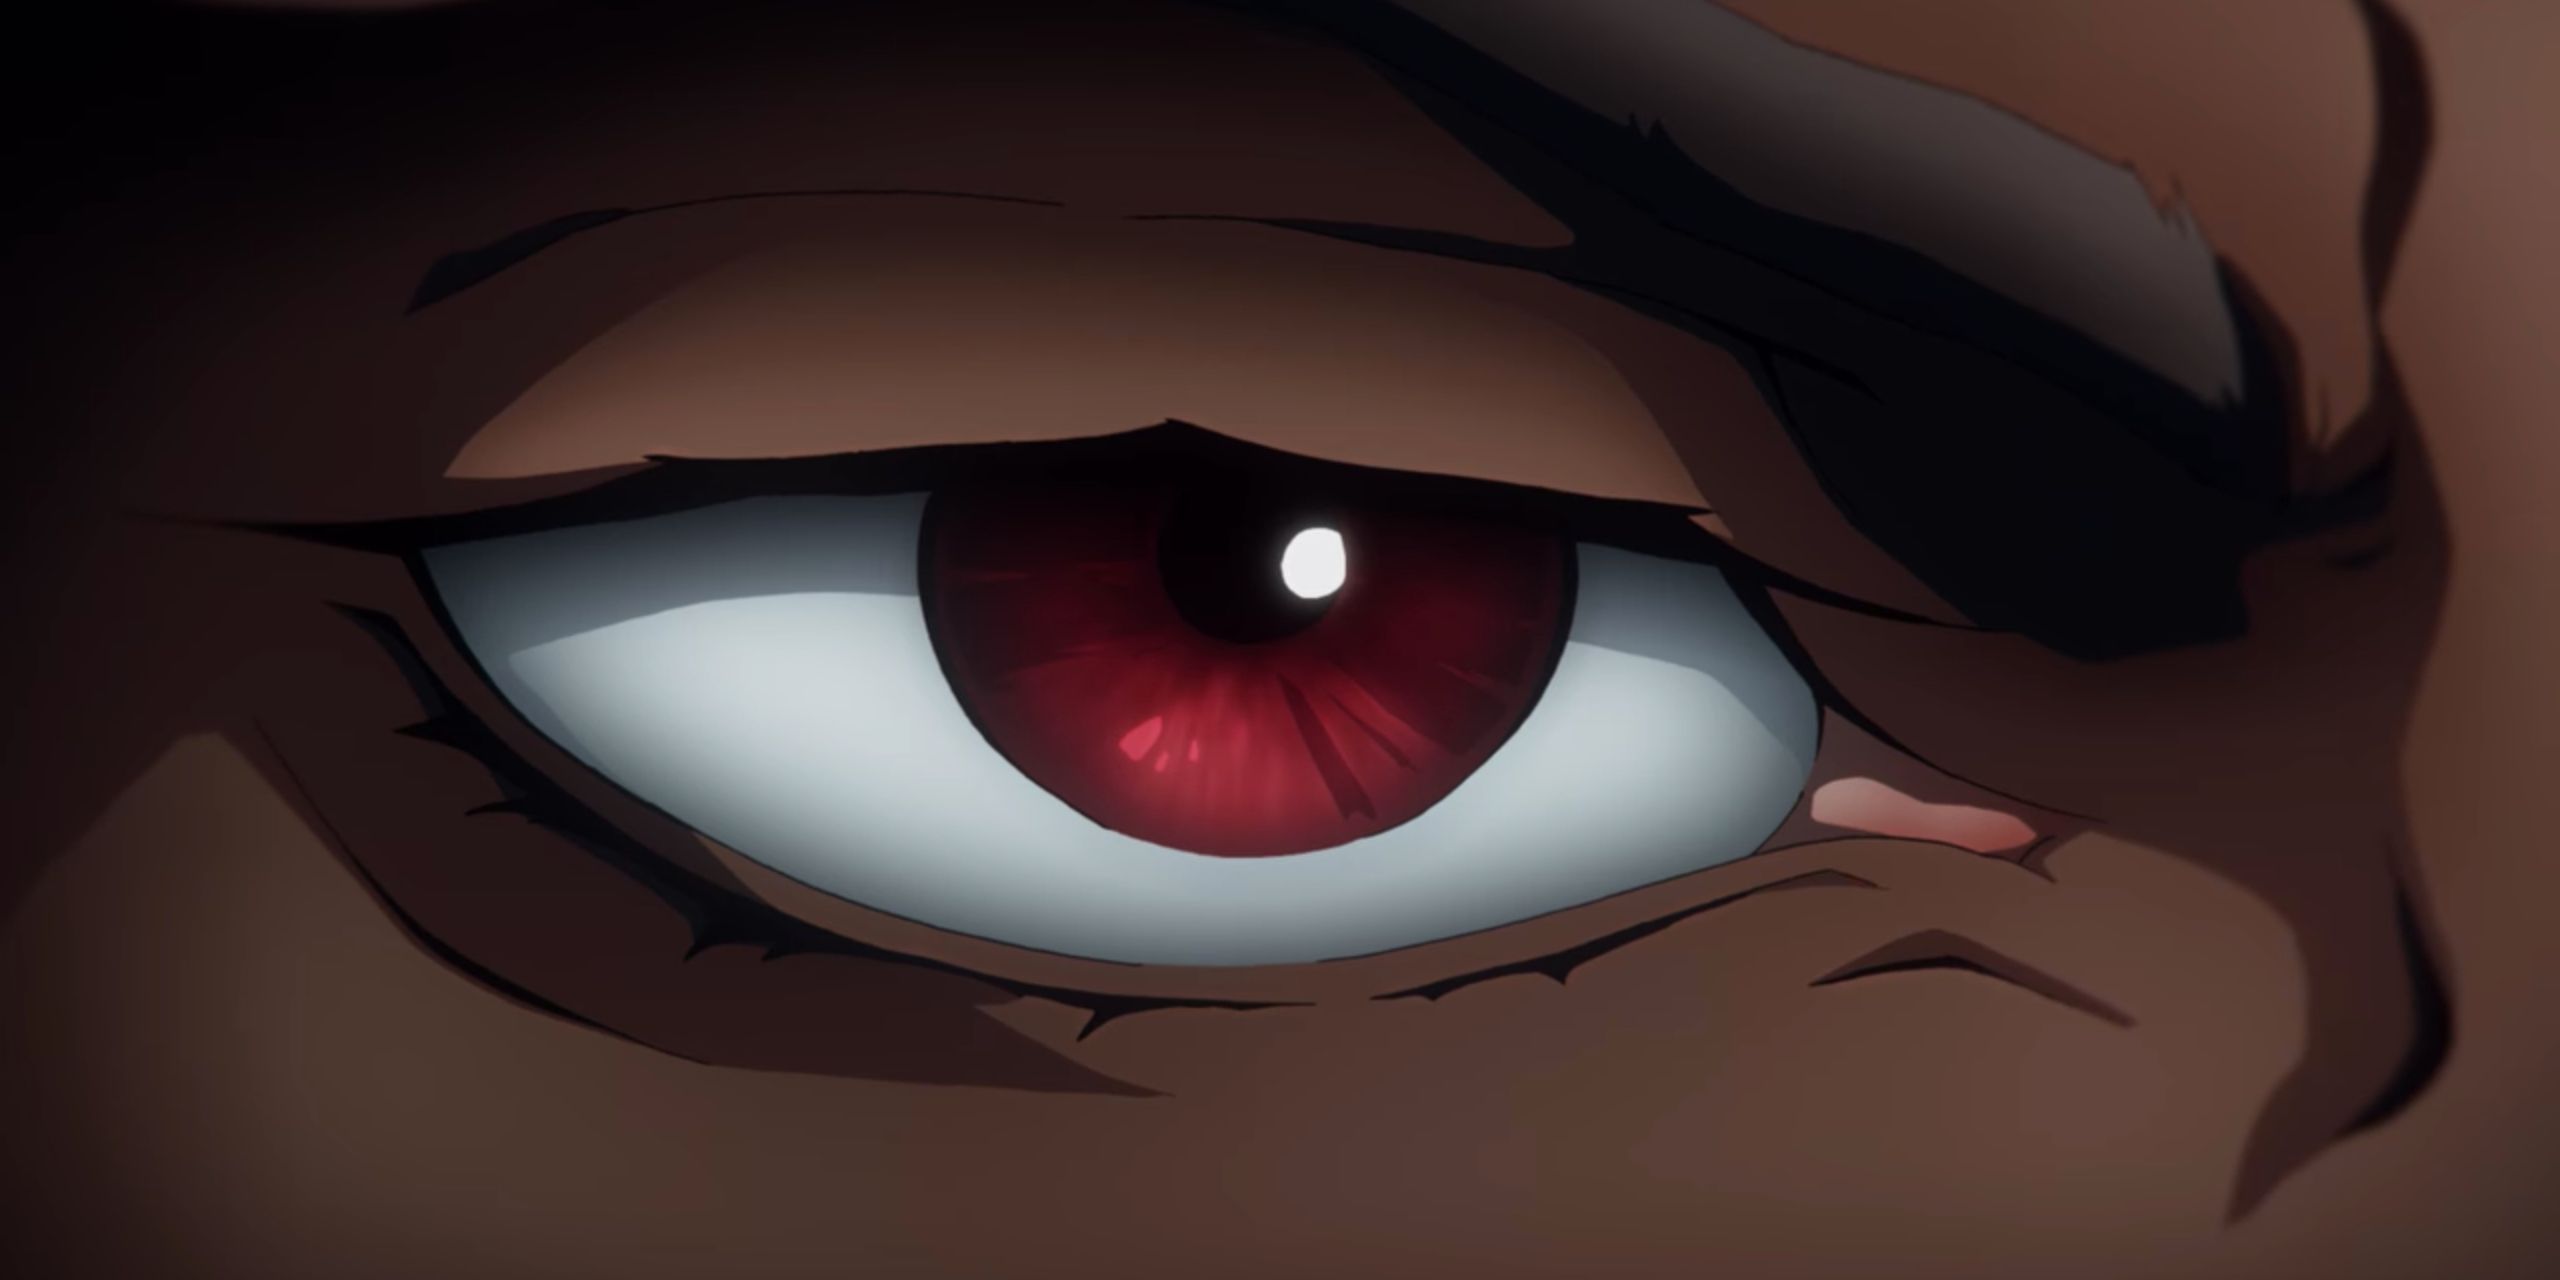 A close-up shot of Isaac's eye, which is colored red.